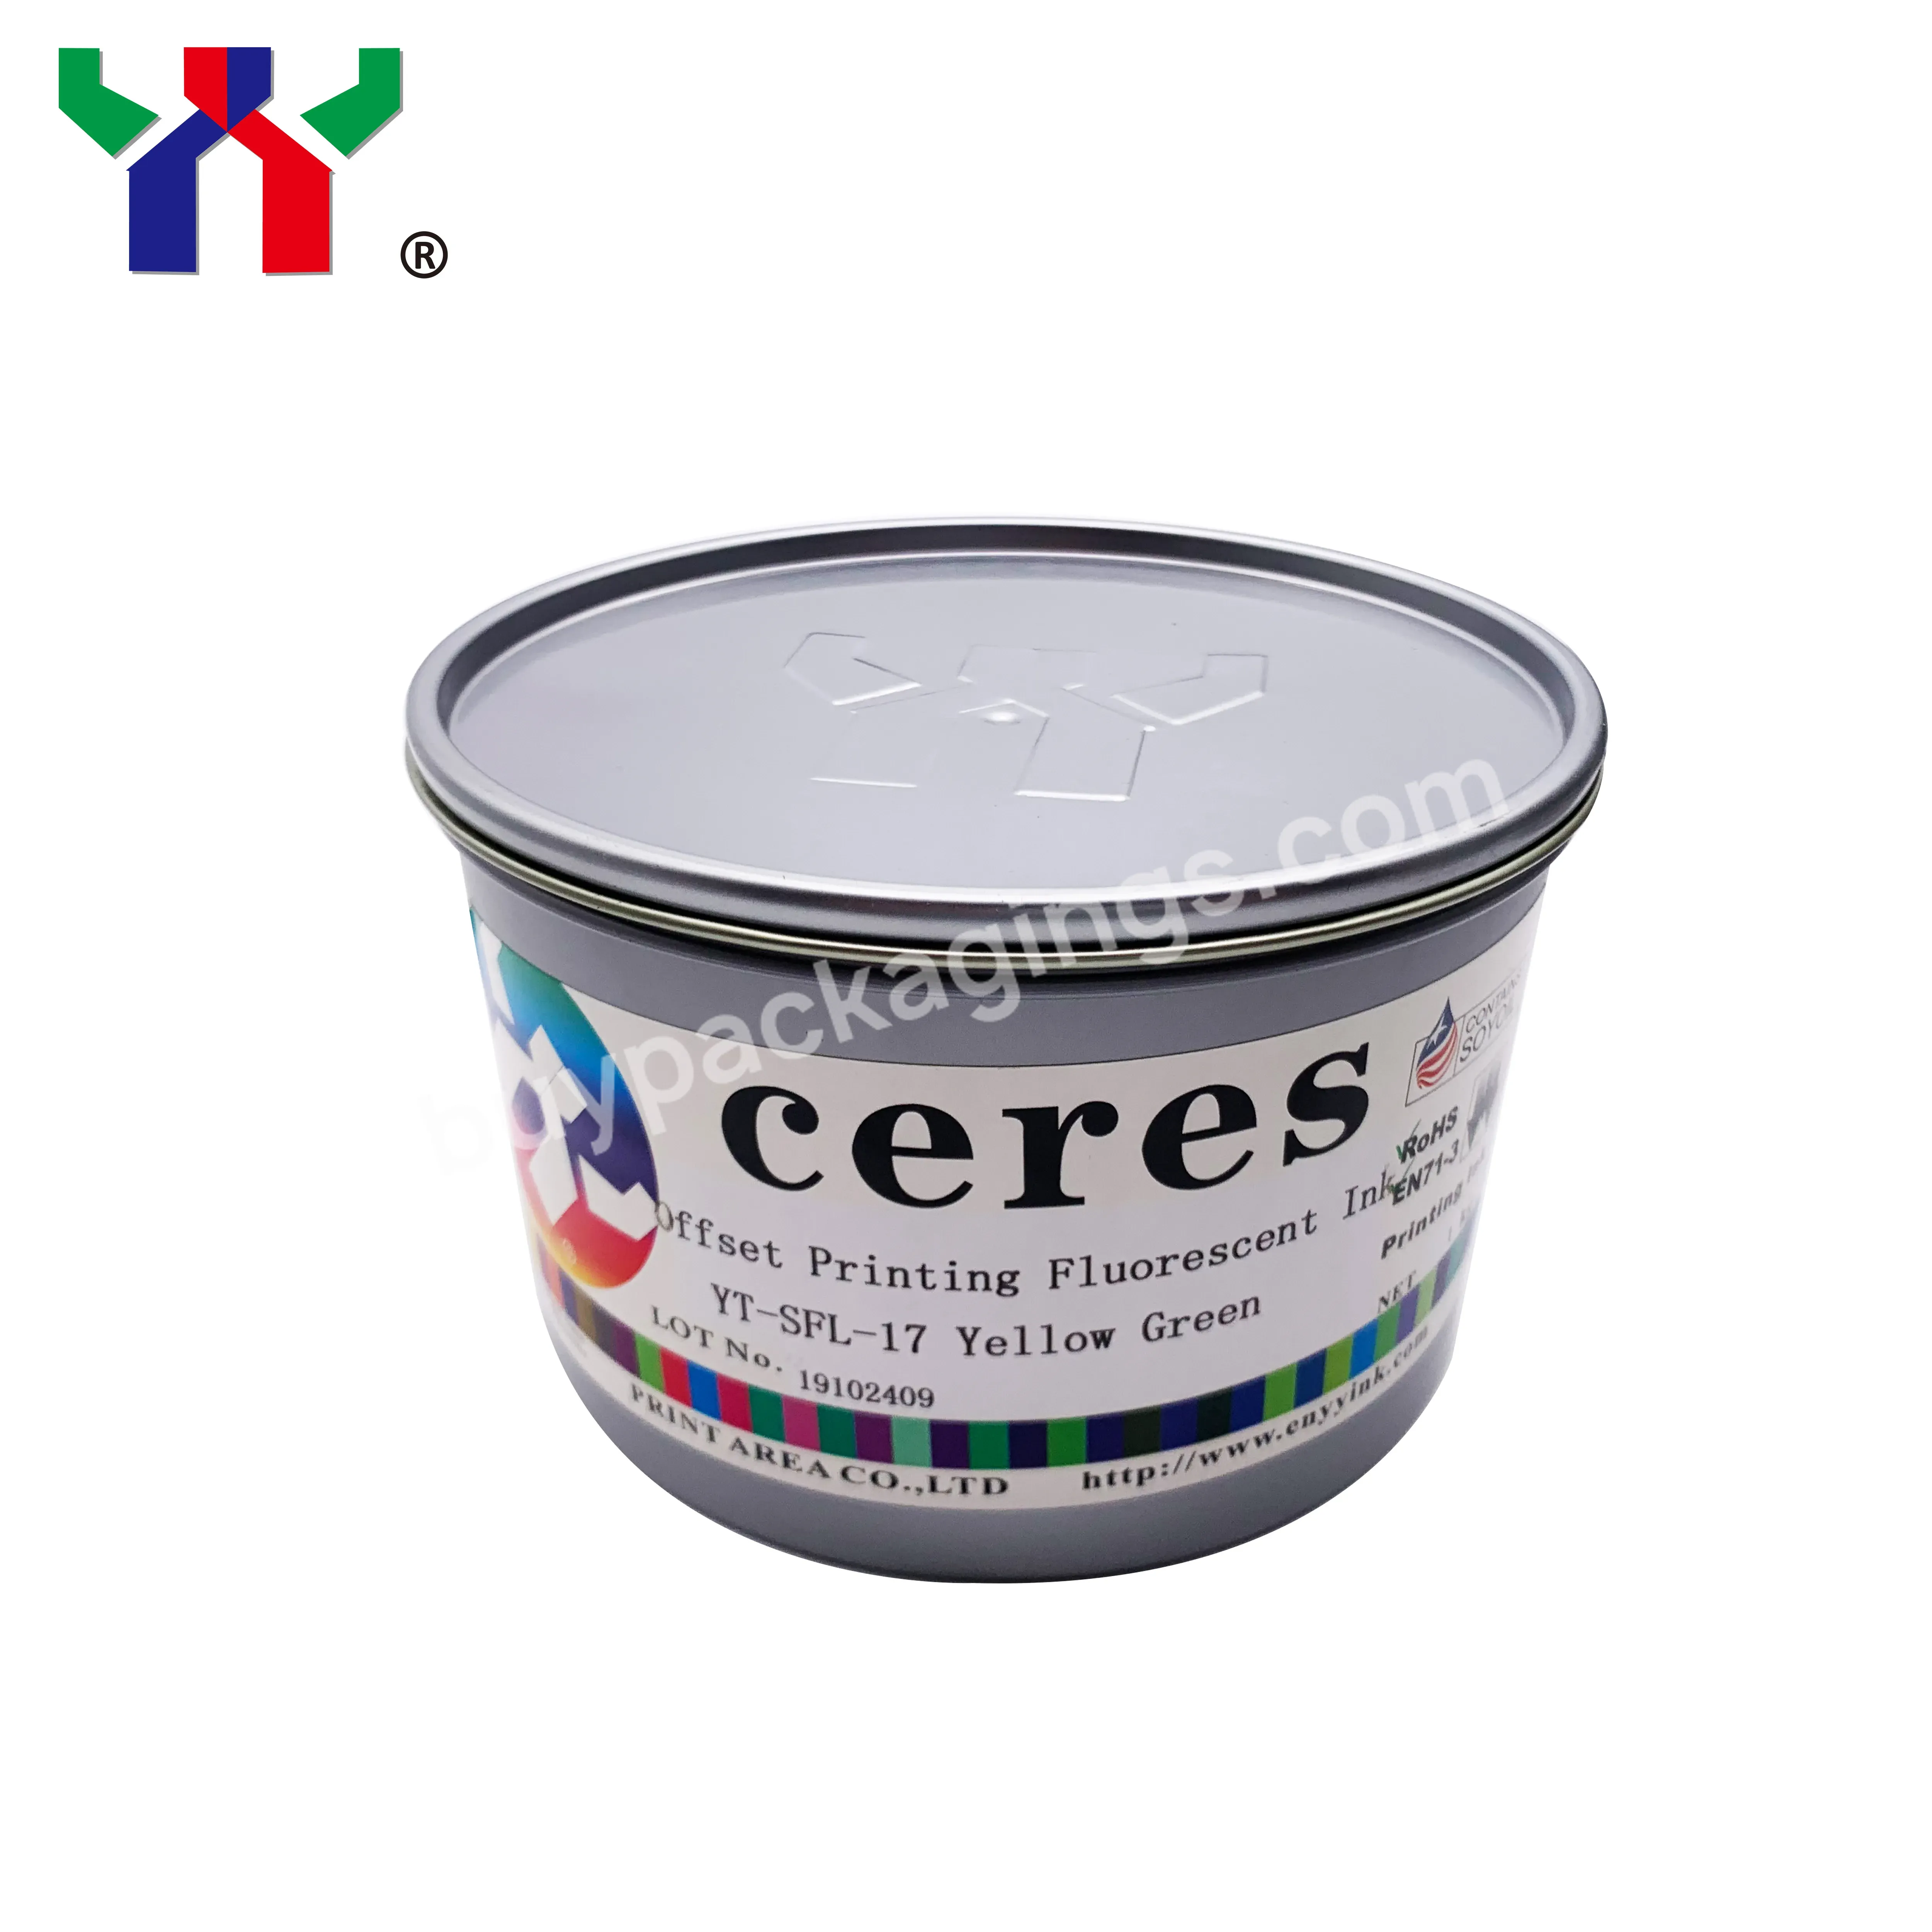 Ceres Offset Printing Fluorescent Ink,Air Dry Yt Sfi-17 Yellow Green,1 Kg/can